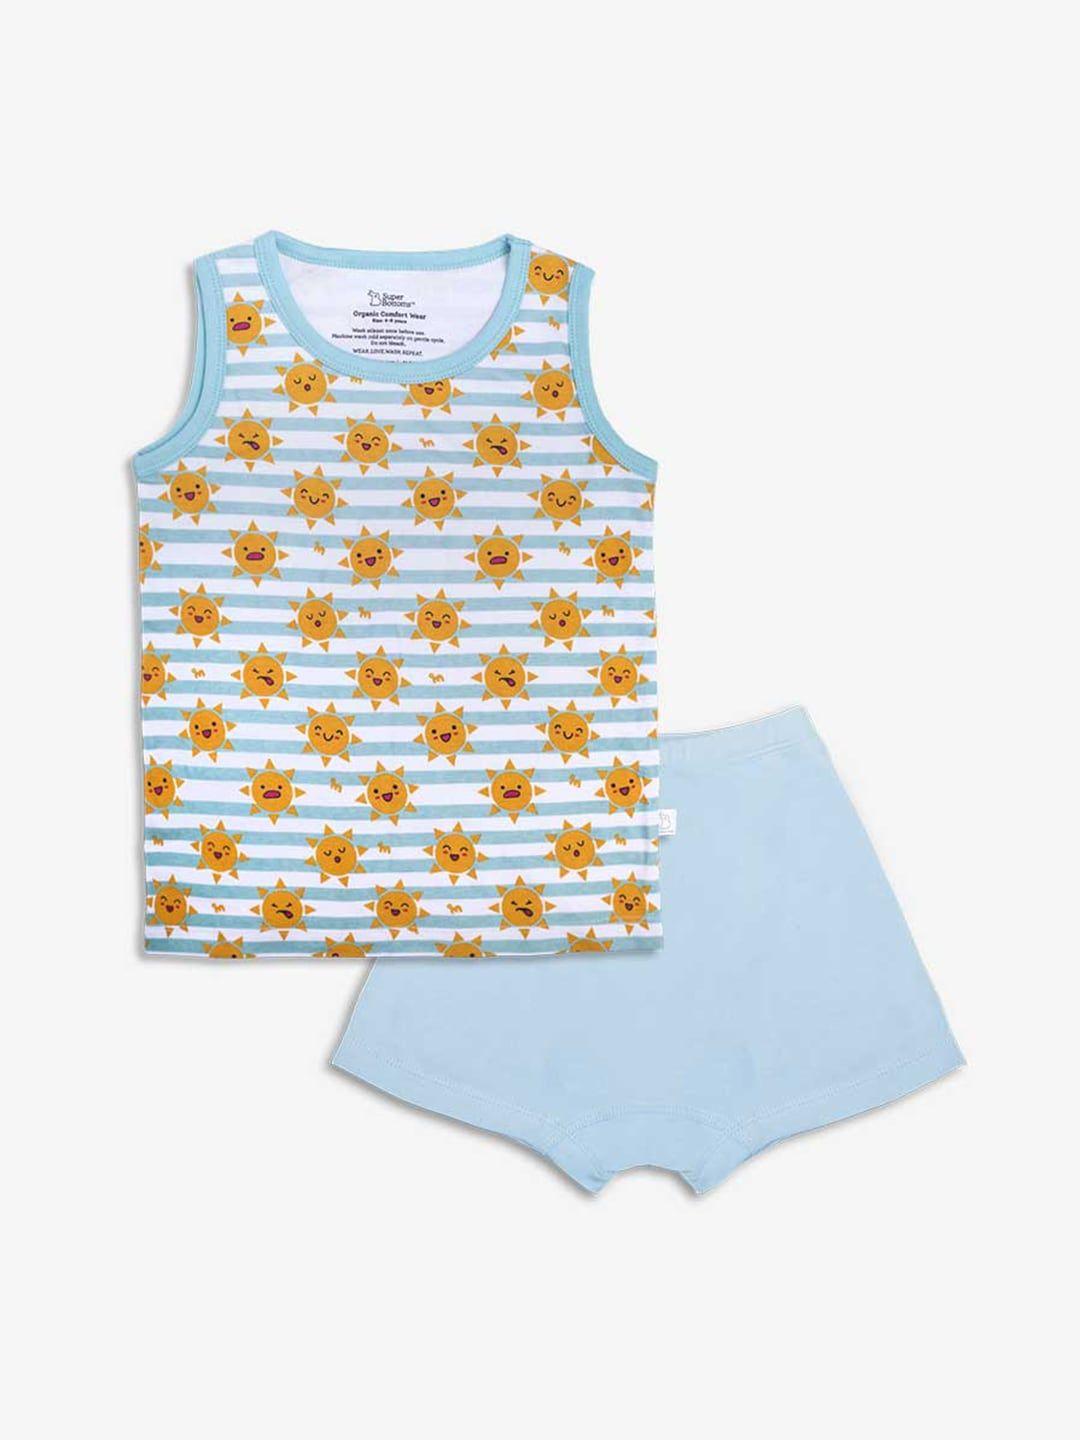 superbottoms unisex kids blue & white printed organic cotton sustainable sustainable t-shirt with shorts